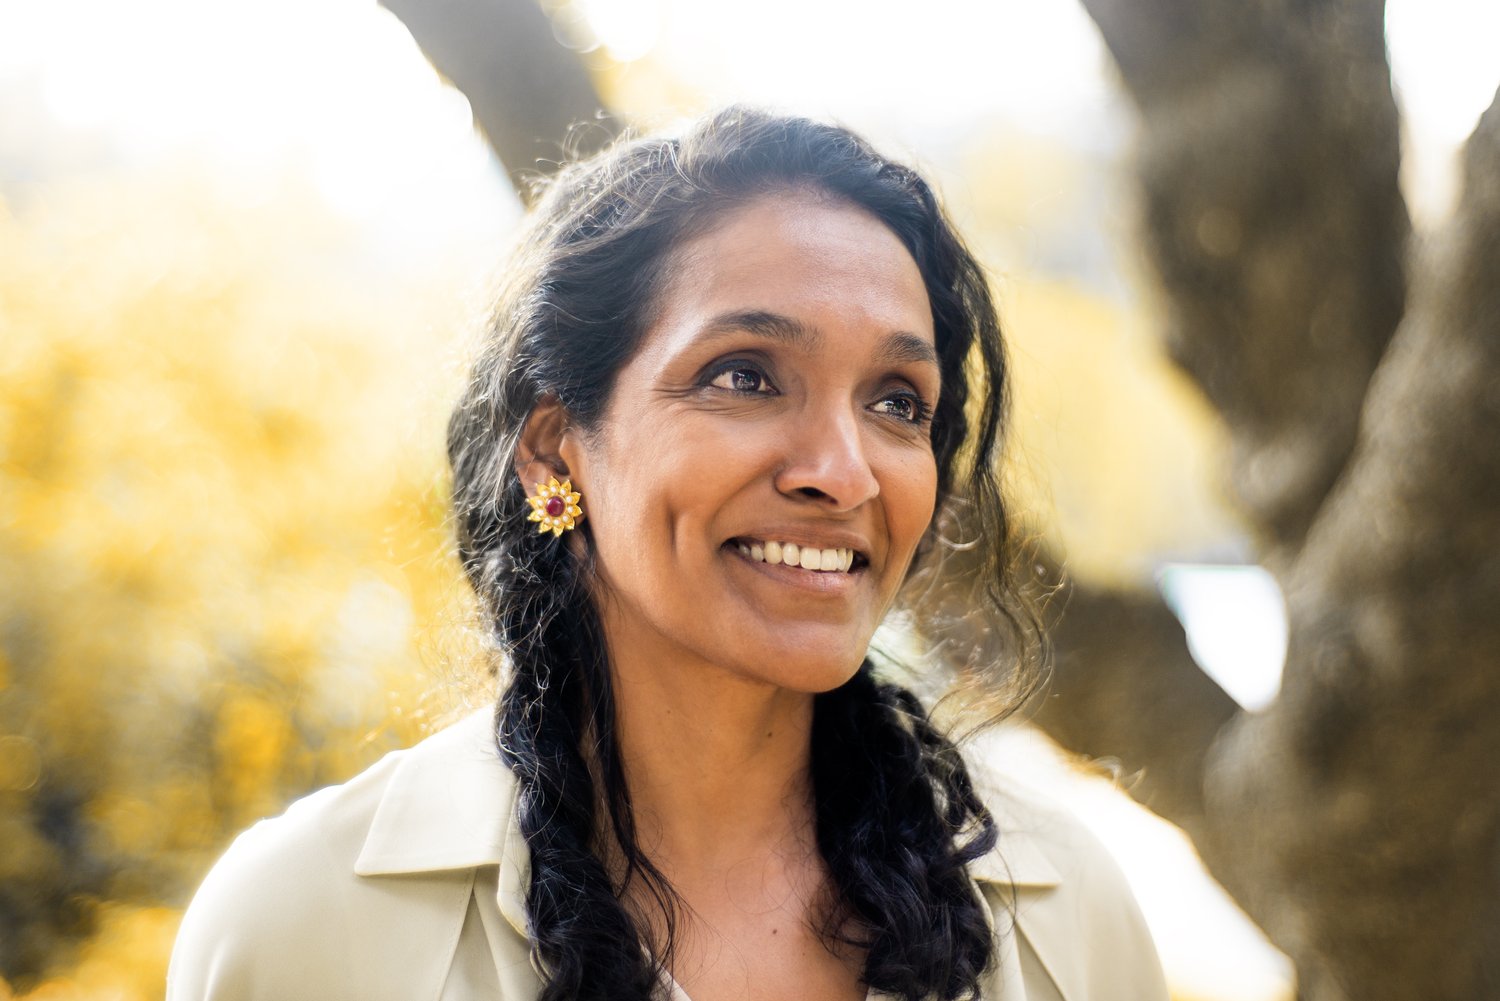 Nithya Raman for City Council, Endorsed by The Los Angeles Times